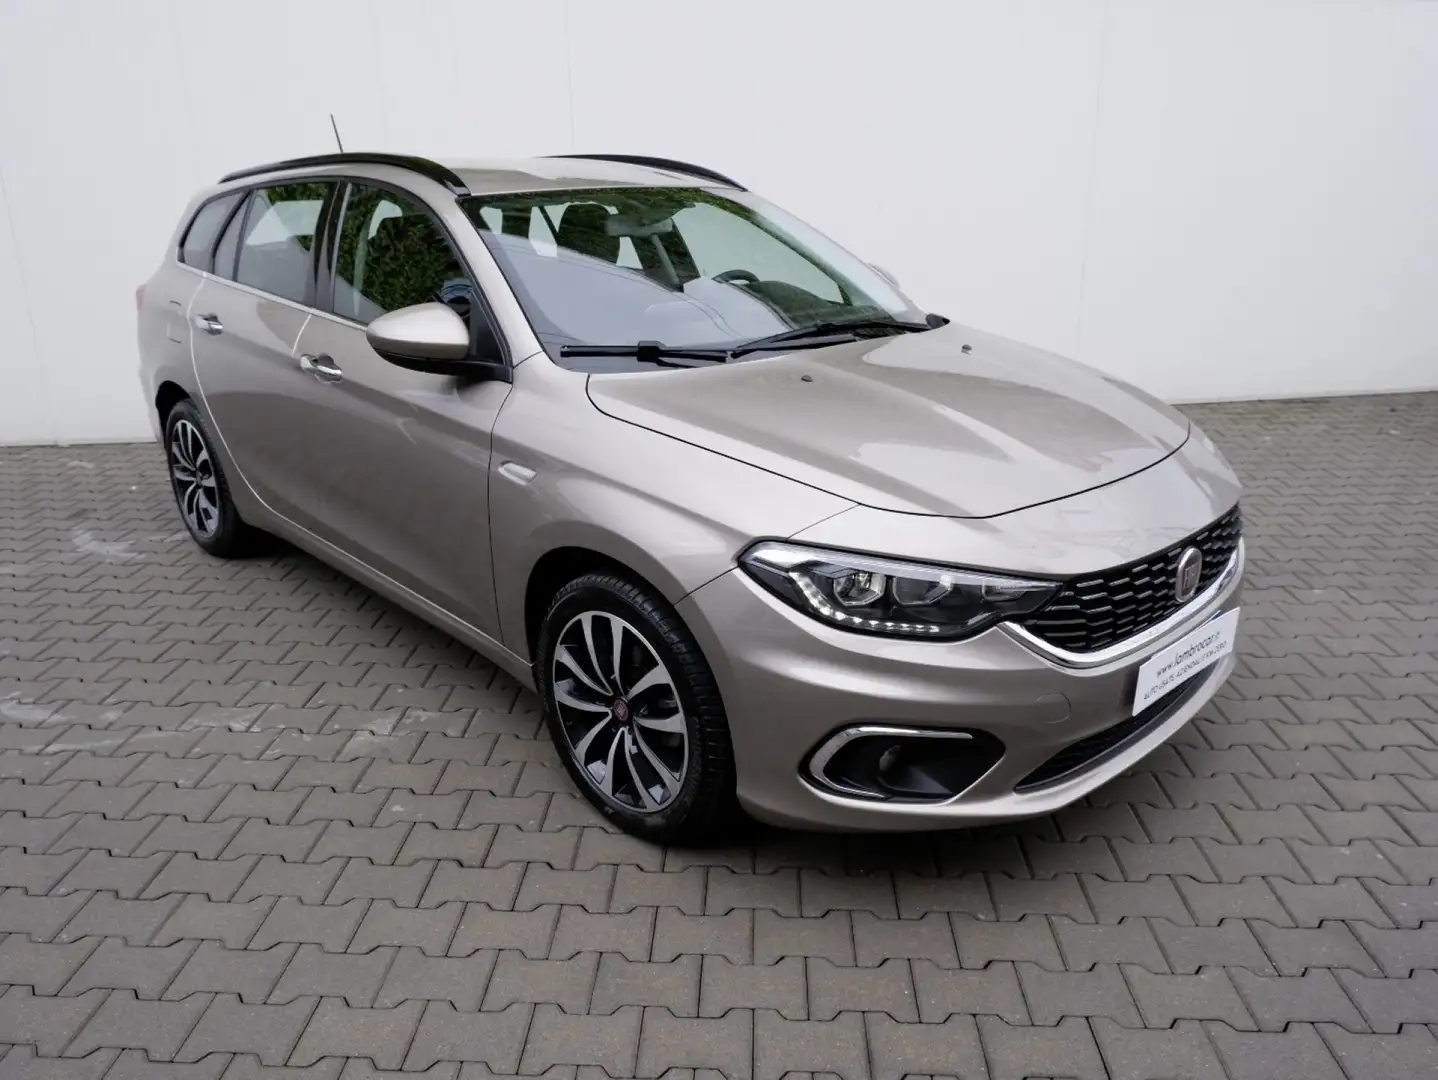 Fiat Tipo 1.6 Mjt S&S DCT SW Lounge 120cv Automatica - 2